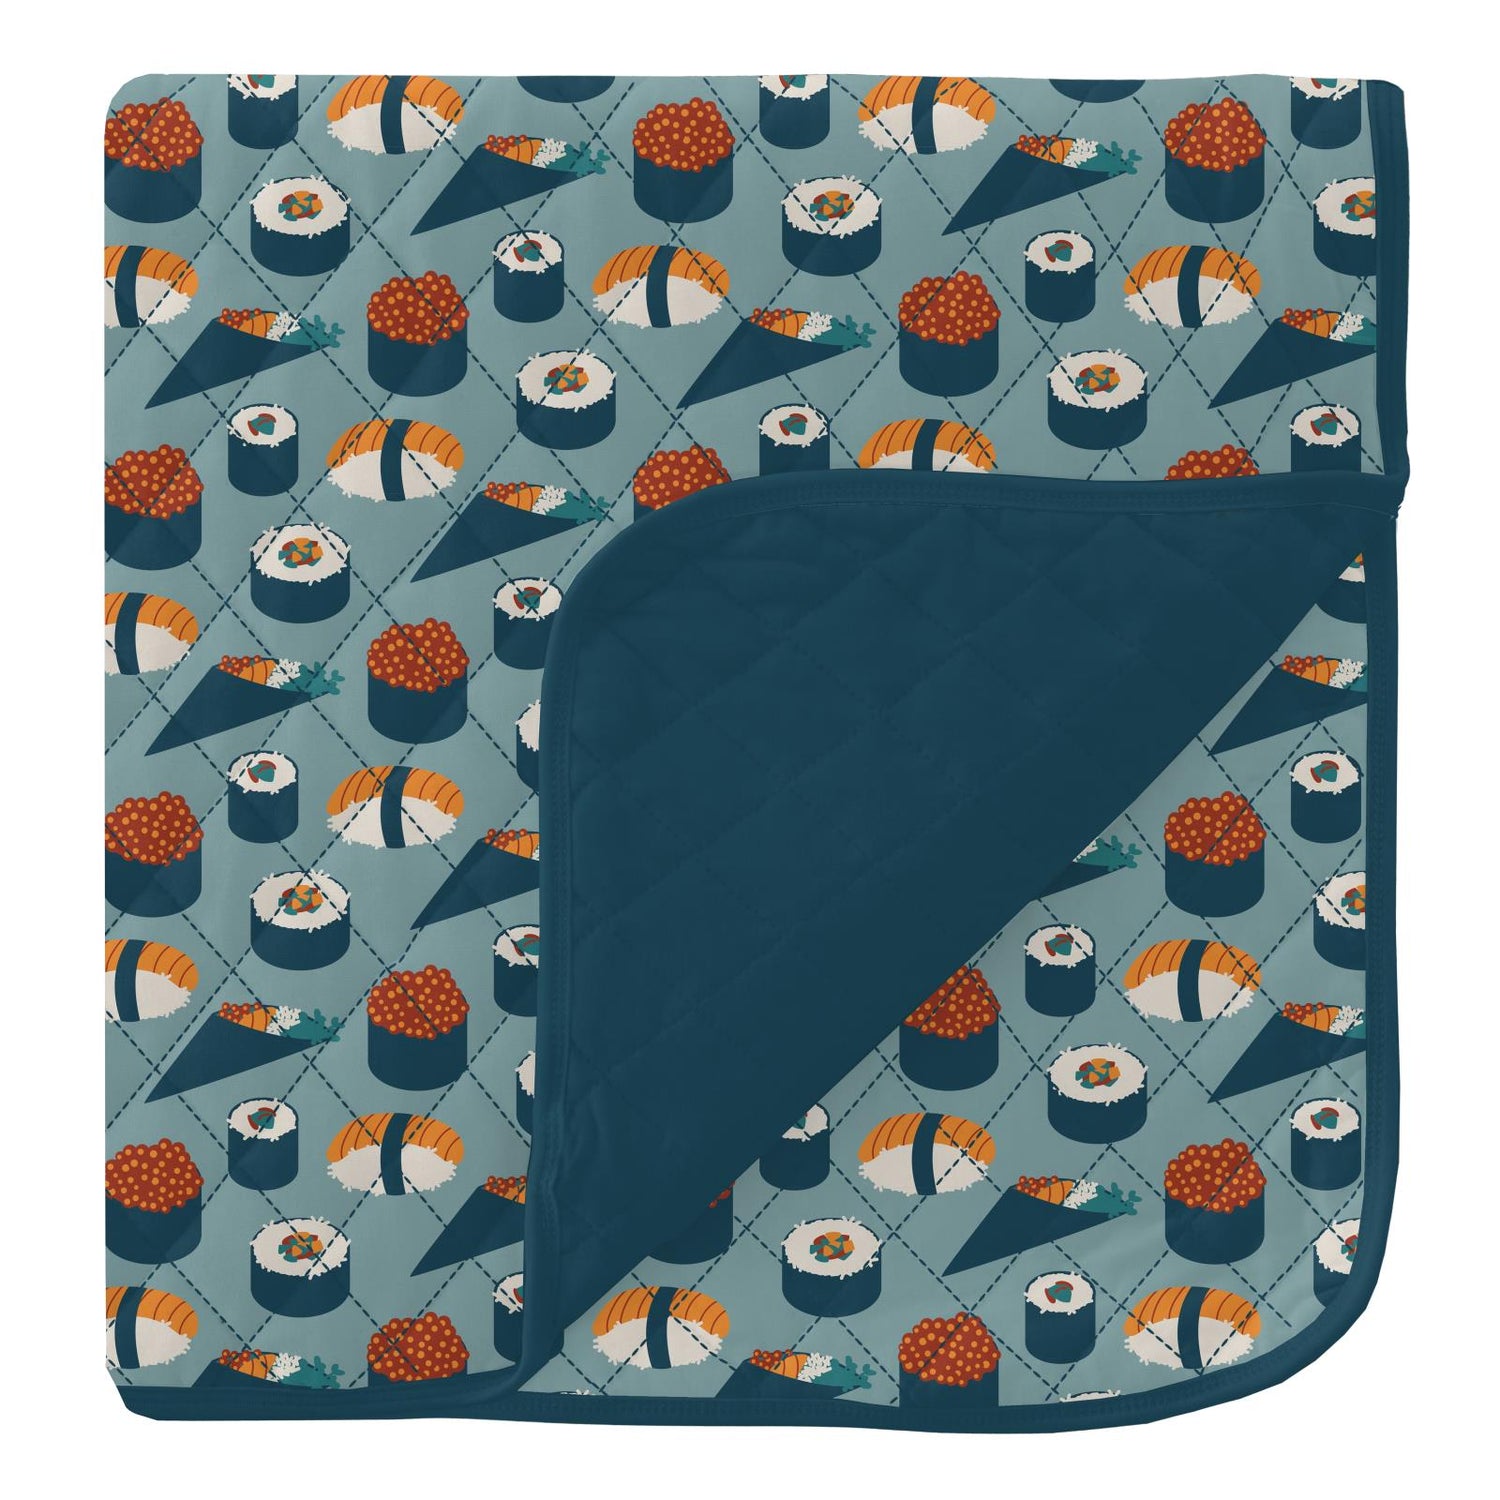 Print Quilted Toddler Blanket in Jade Sushi/Peacock